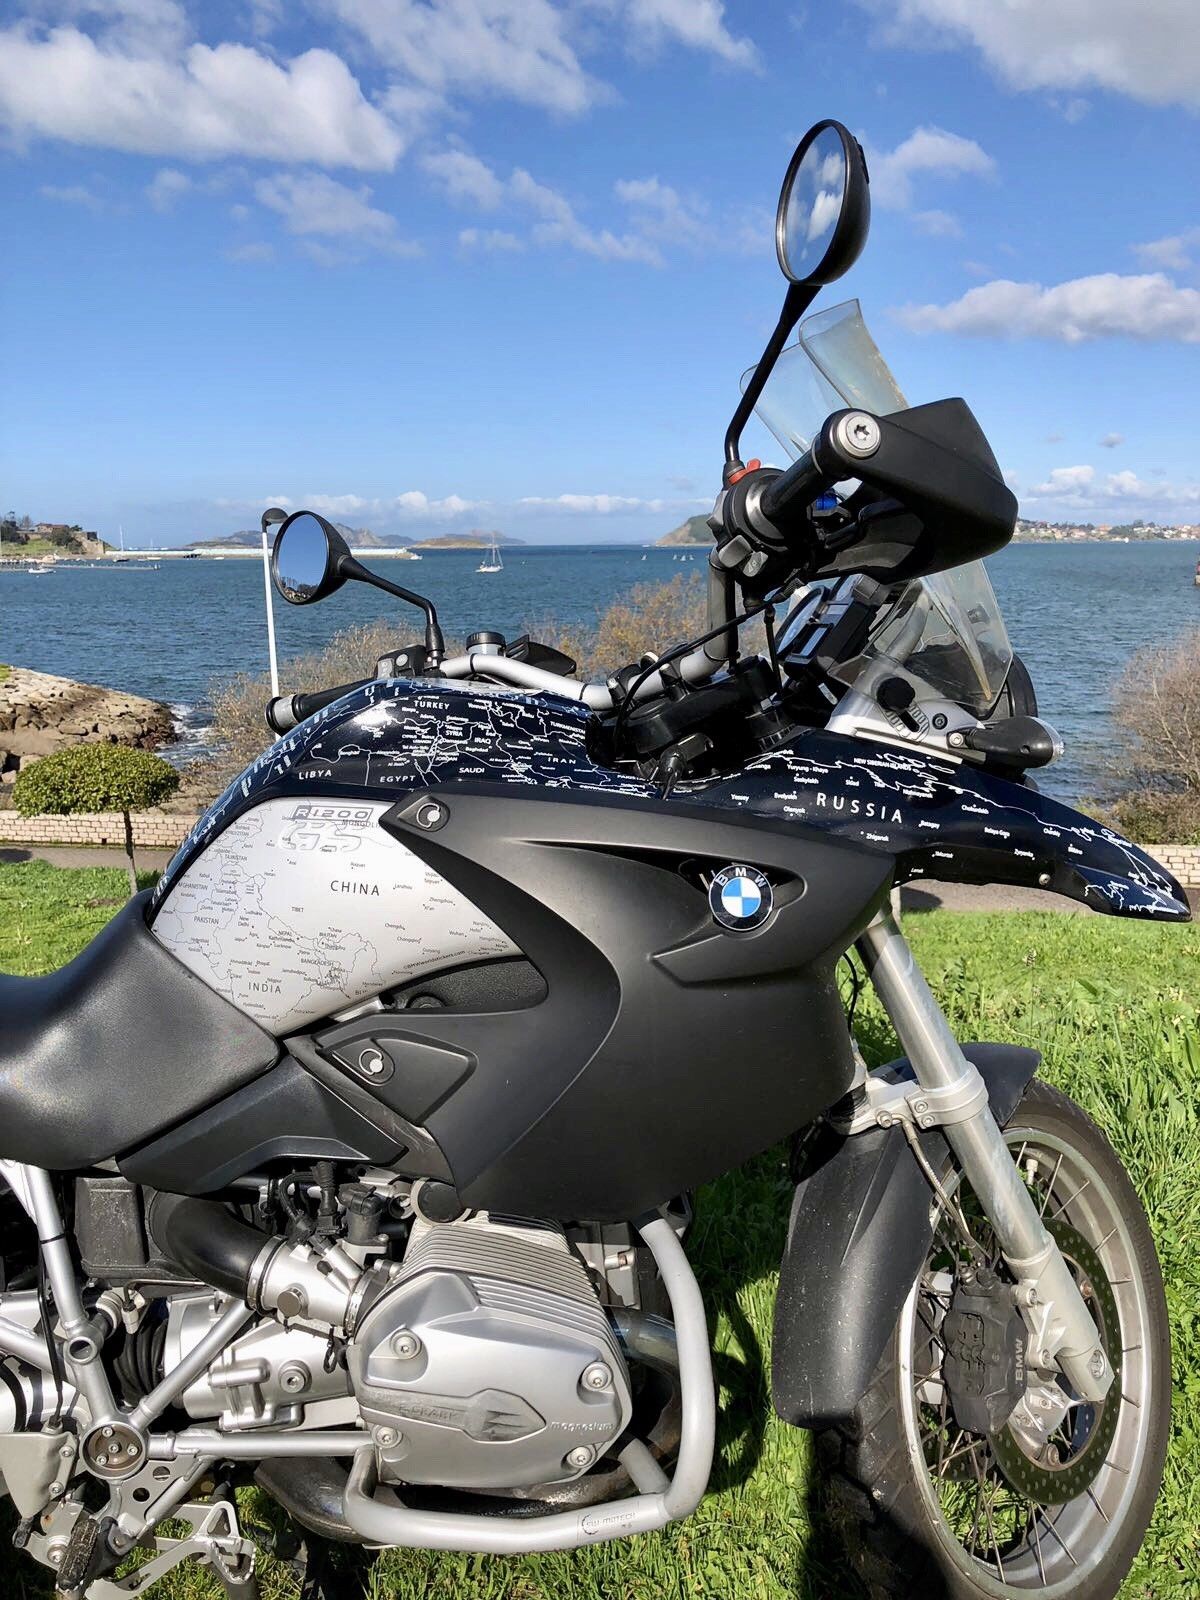 BMW R1200GS 2004 to 2007 BMW World Stickers and Decals Landscape Picture Full Right Side View White Map Transparent Decals On Black Bike Side Panels In Black